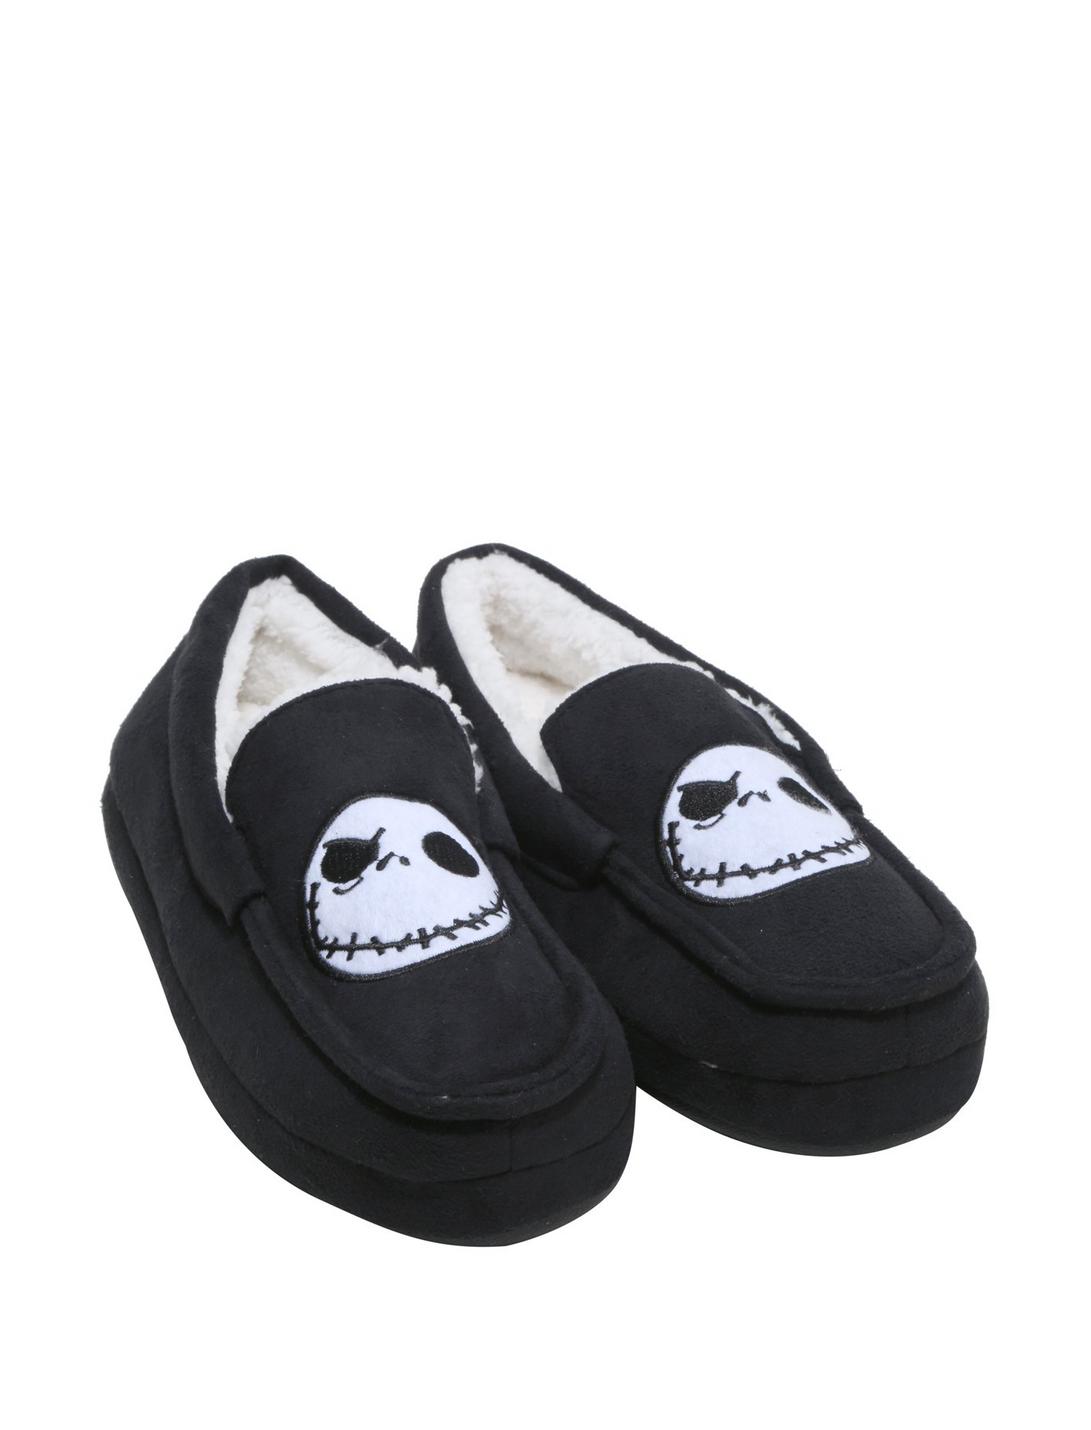 The Nightmare Before Christmas Moccasin Slippers, BLACK, hi-res